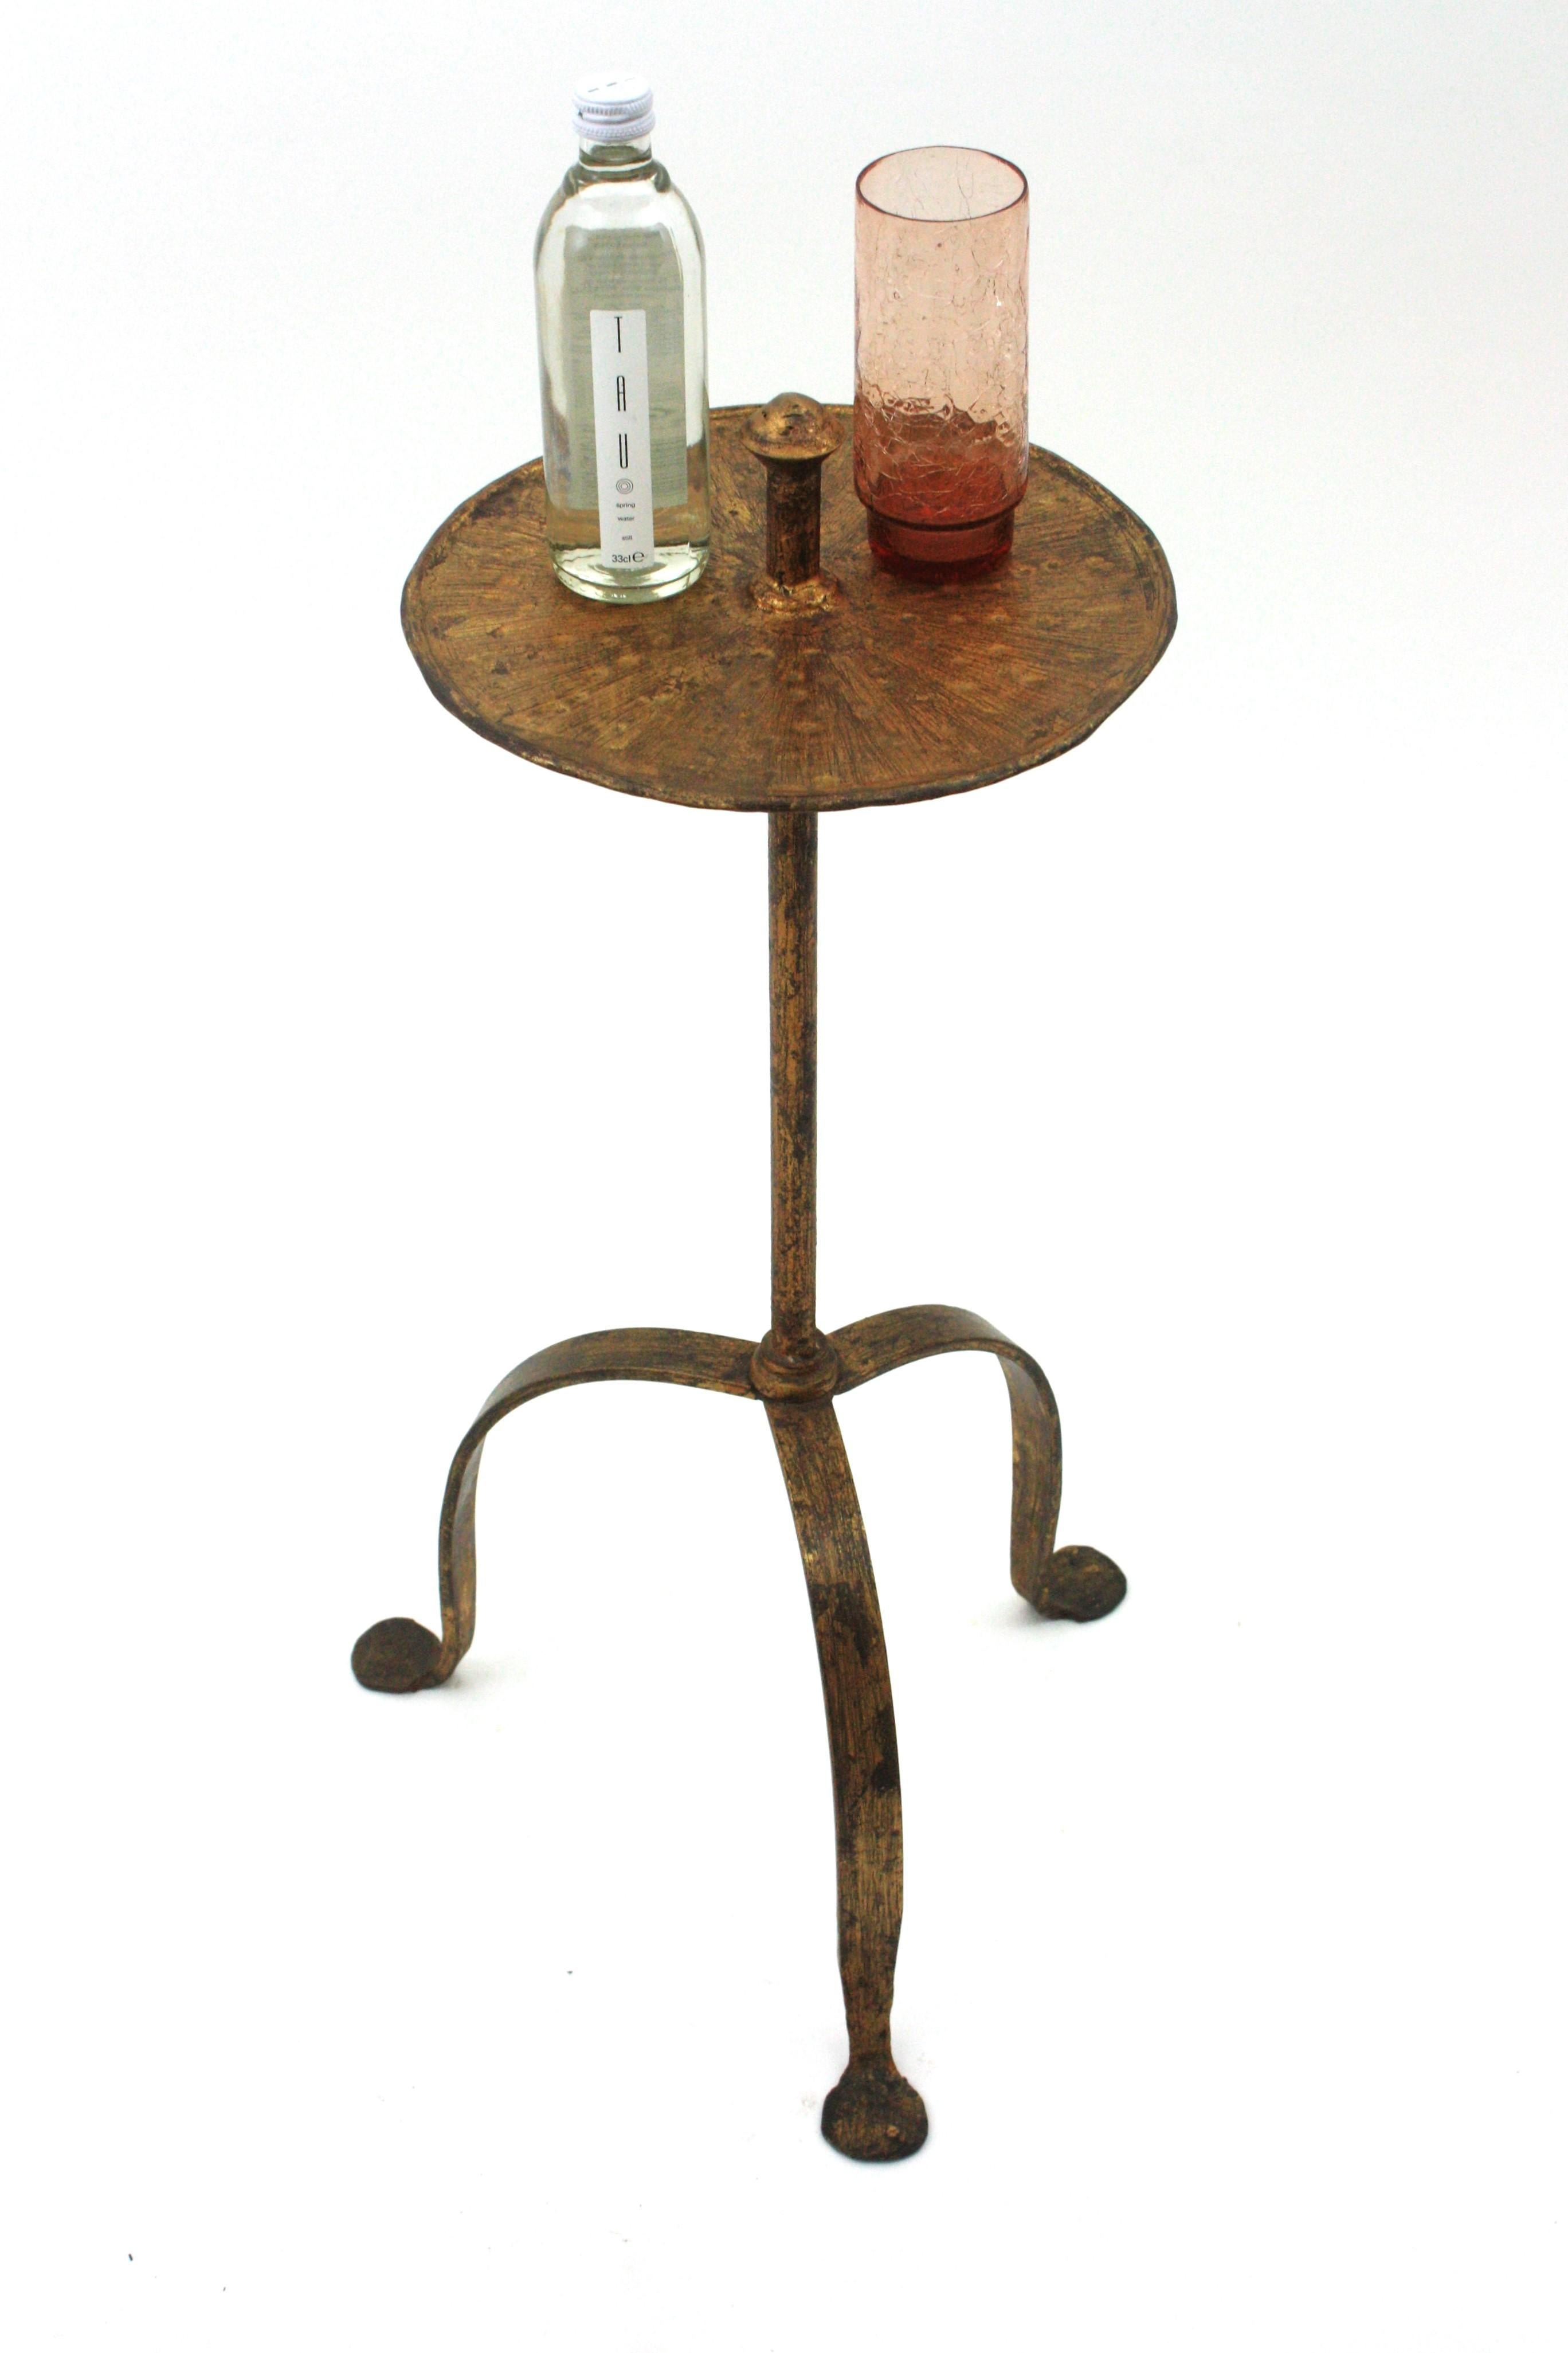 Elegant hand-hammered iron drinks end table or pedestal table standing on a tripod base with handle on the top. Spain, 1940s.
This table features a round top richly adorned by the Hammer marks standing on a tripod base with round ending feet. The